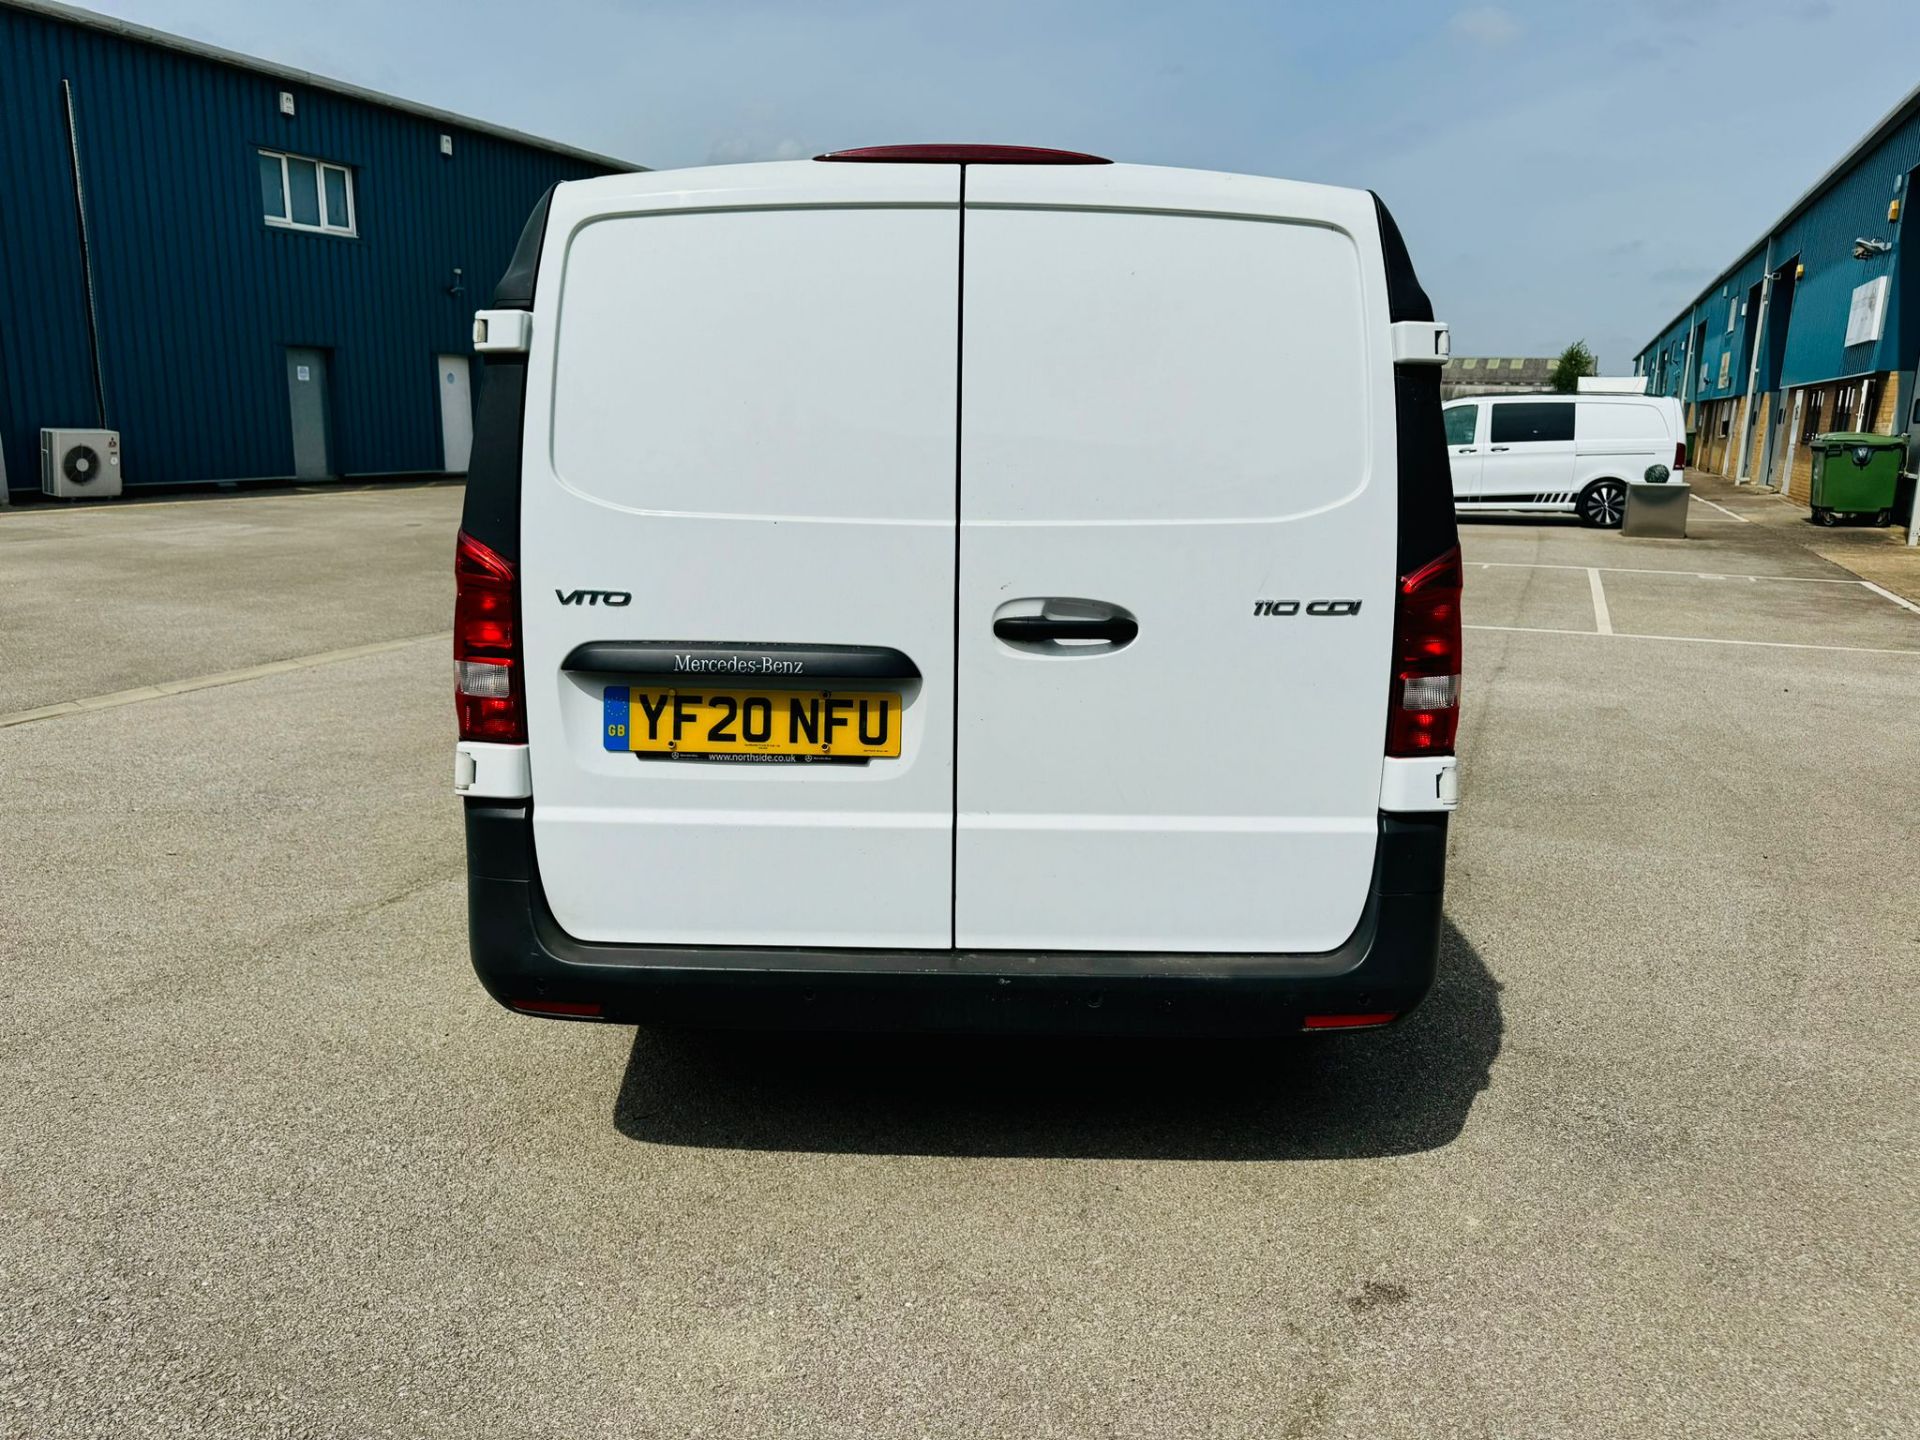 MERCEDES BENZ VITO CDI PURE - 2020 20 Reg - Only 74k Miles - 1 Owner From New - Parking Sensors - Image 7 of 21